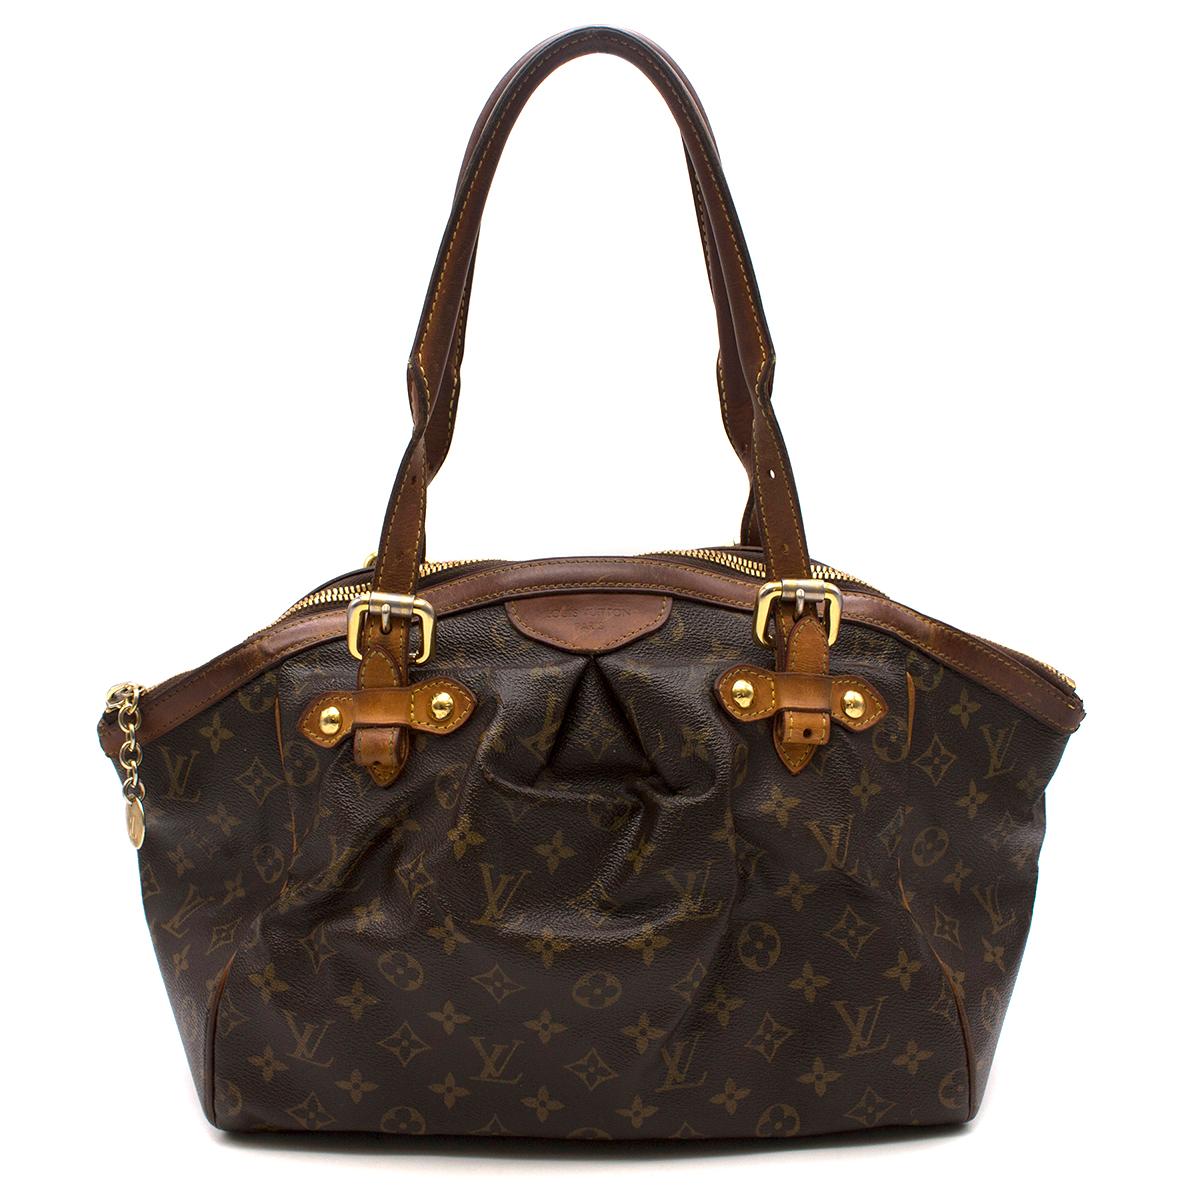 Louis Vuitton Monogram Tivoli GM Handbag

- Brown, monogram canvas leather handbag
- Rolled adjustable top handles
- Top zip fastening
- Main large compartment
- Internal two patch pockets and a phone holder pocket
- Five protective metal feet
-